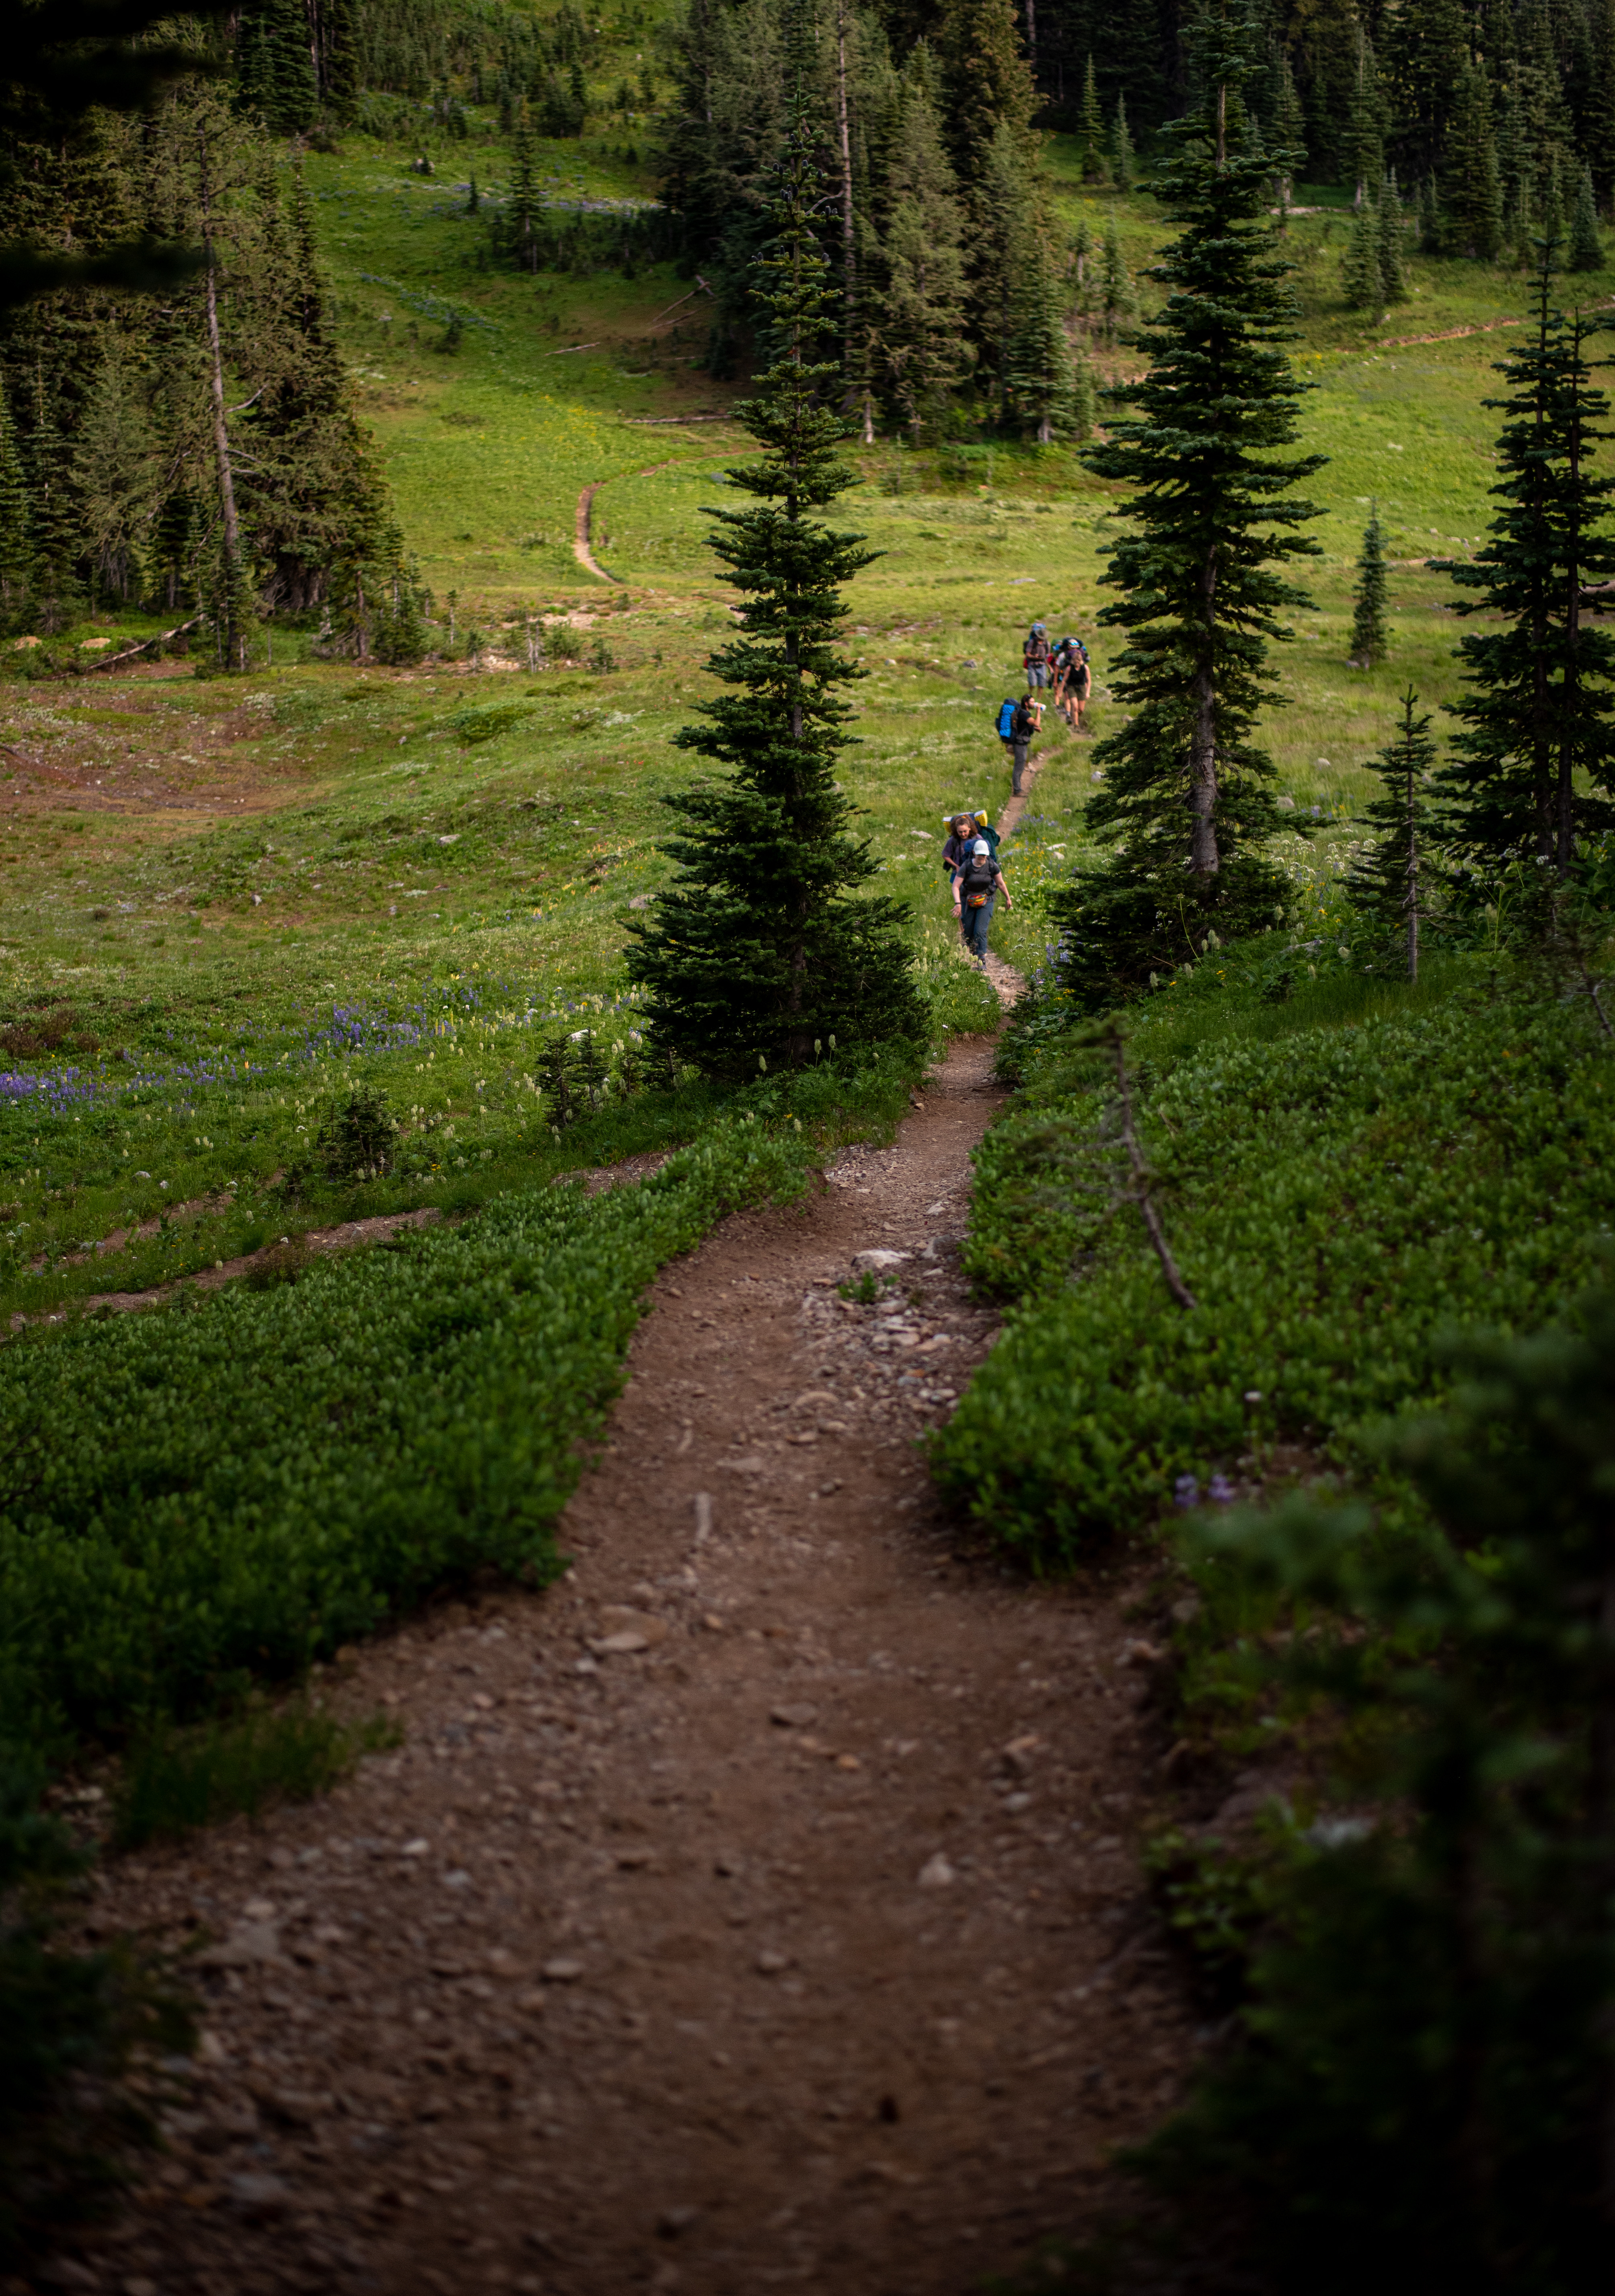 Hikers on a trail in lush alpine green landscape